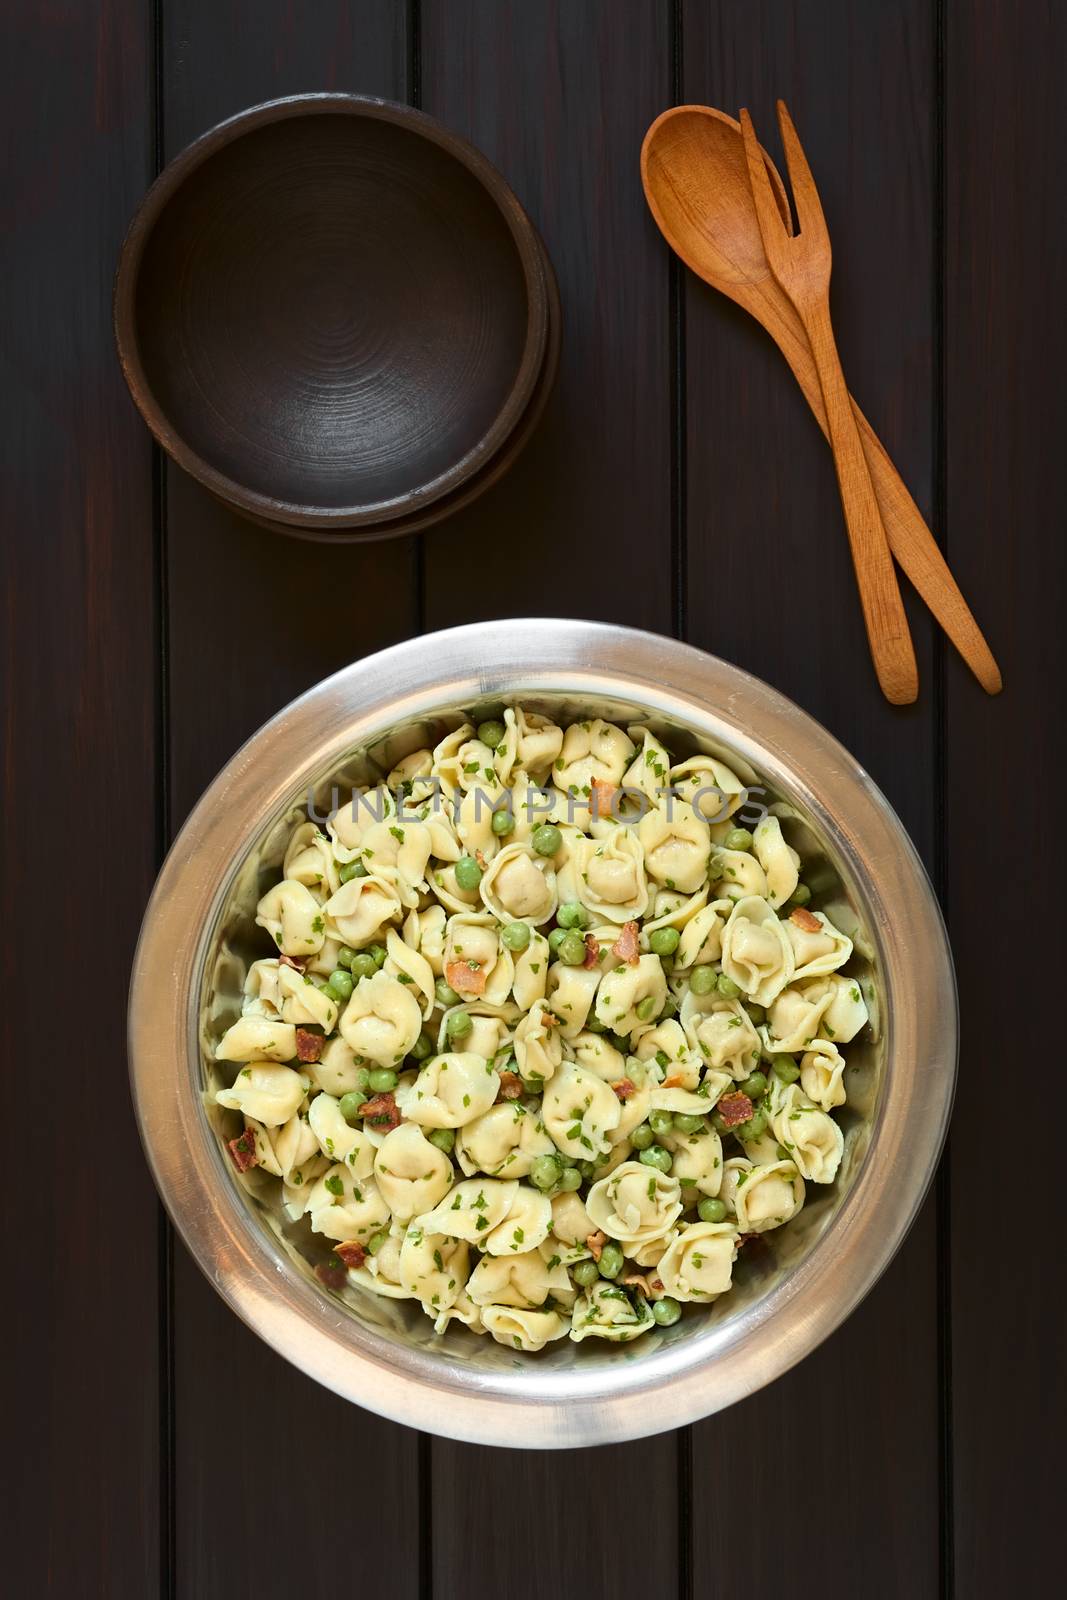 Tortellini Salad with Peas and Bacon by ildi